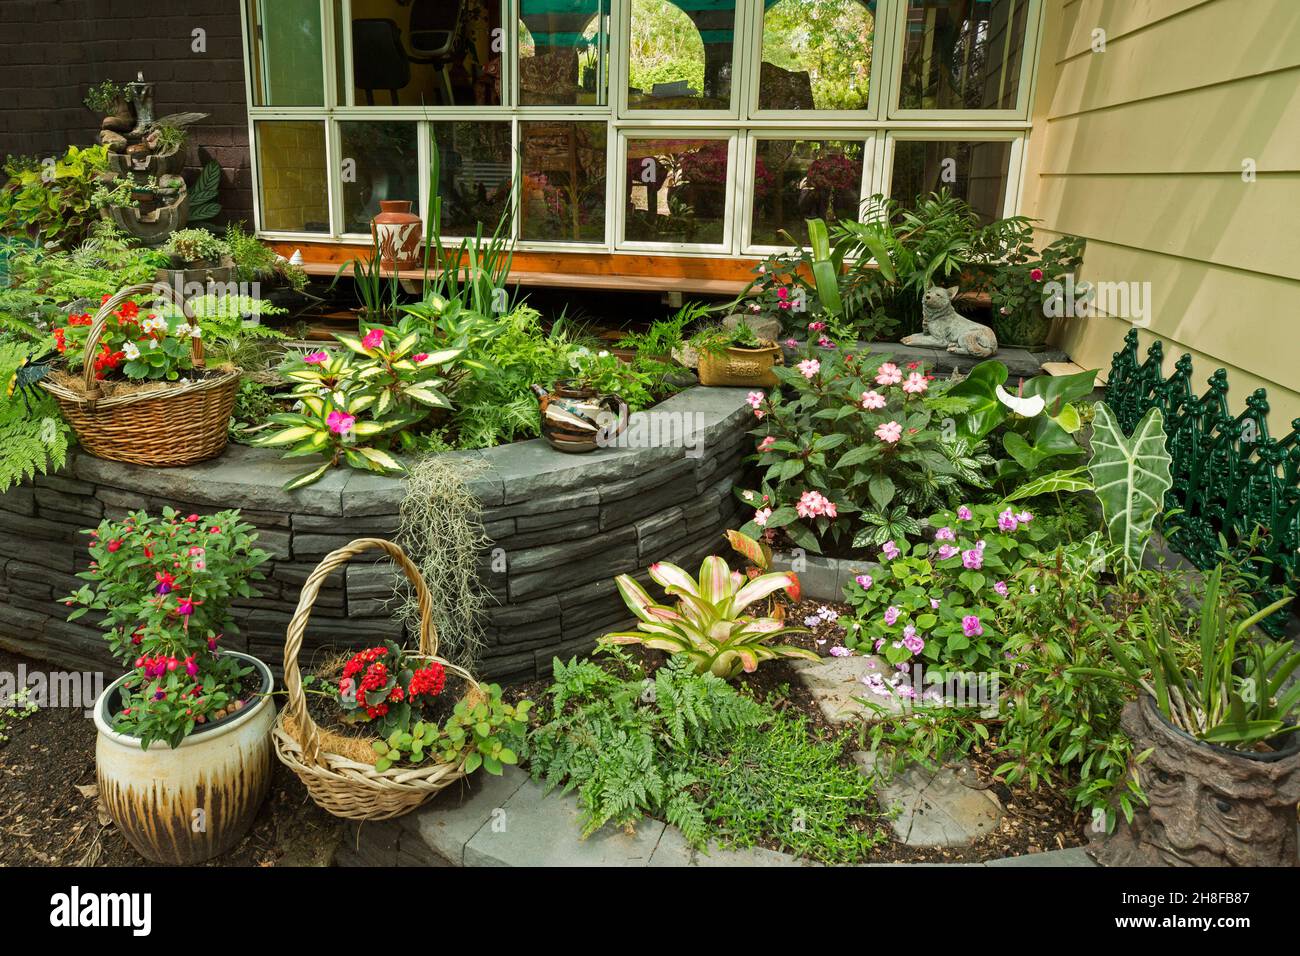 Spectacular courtyard garden with decorative walls and masses of colourful flowers, ferns, plants with colourful foliage, some in ornate containers Stock Photo